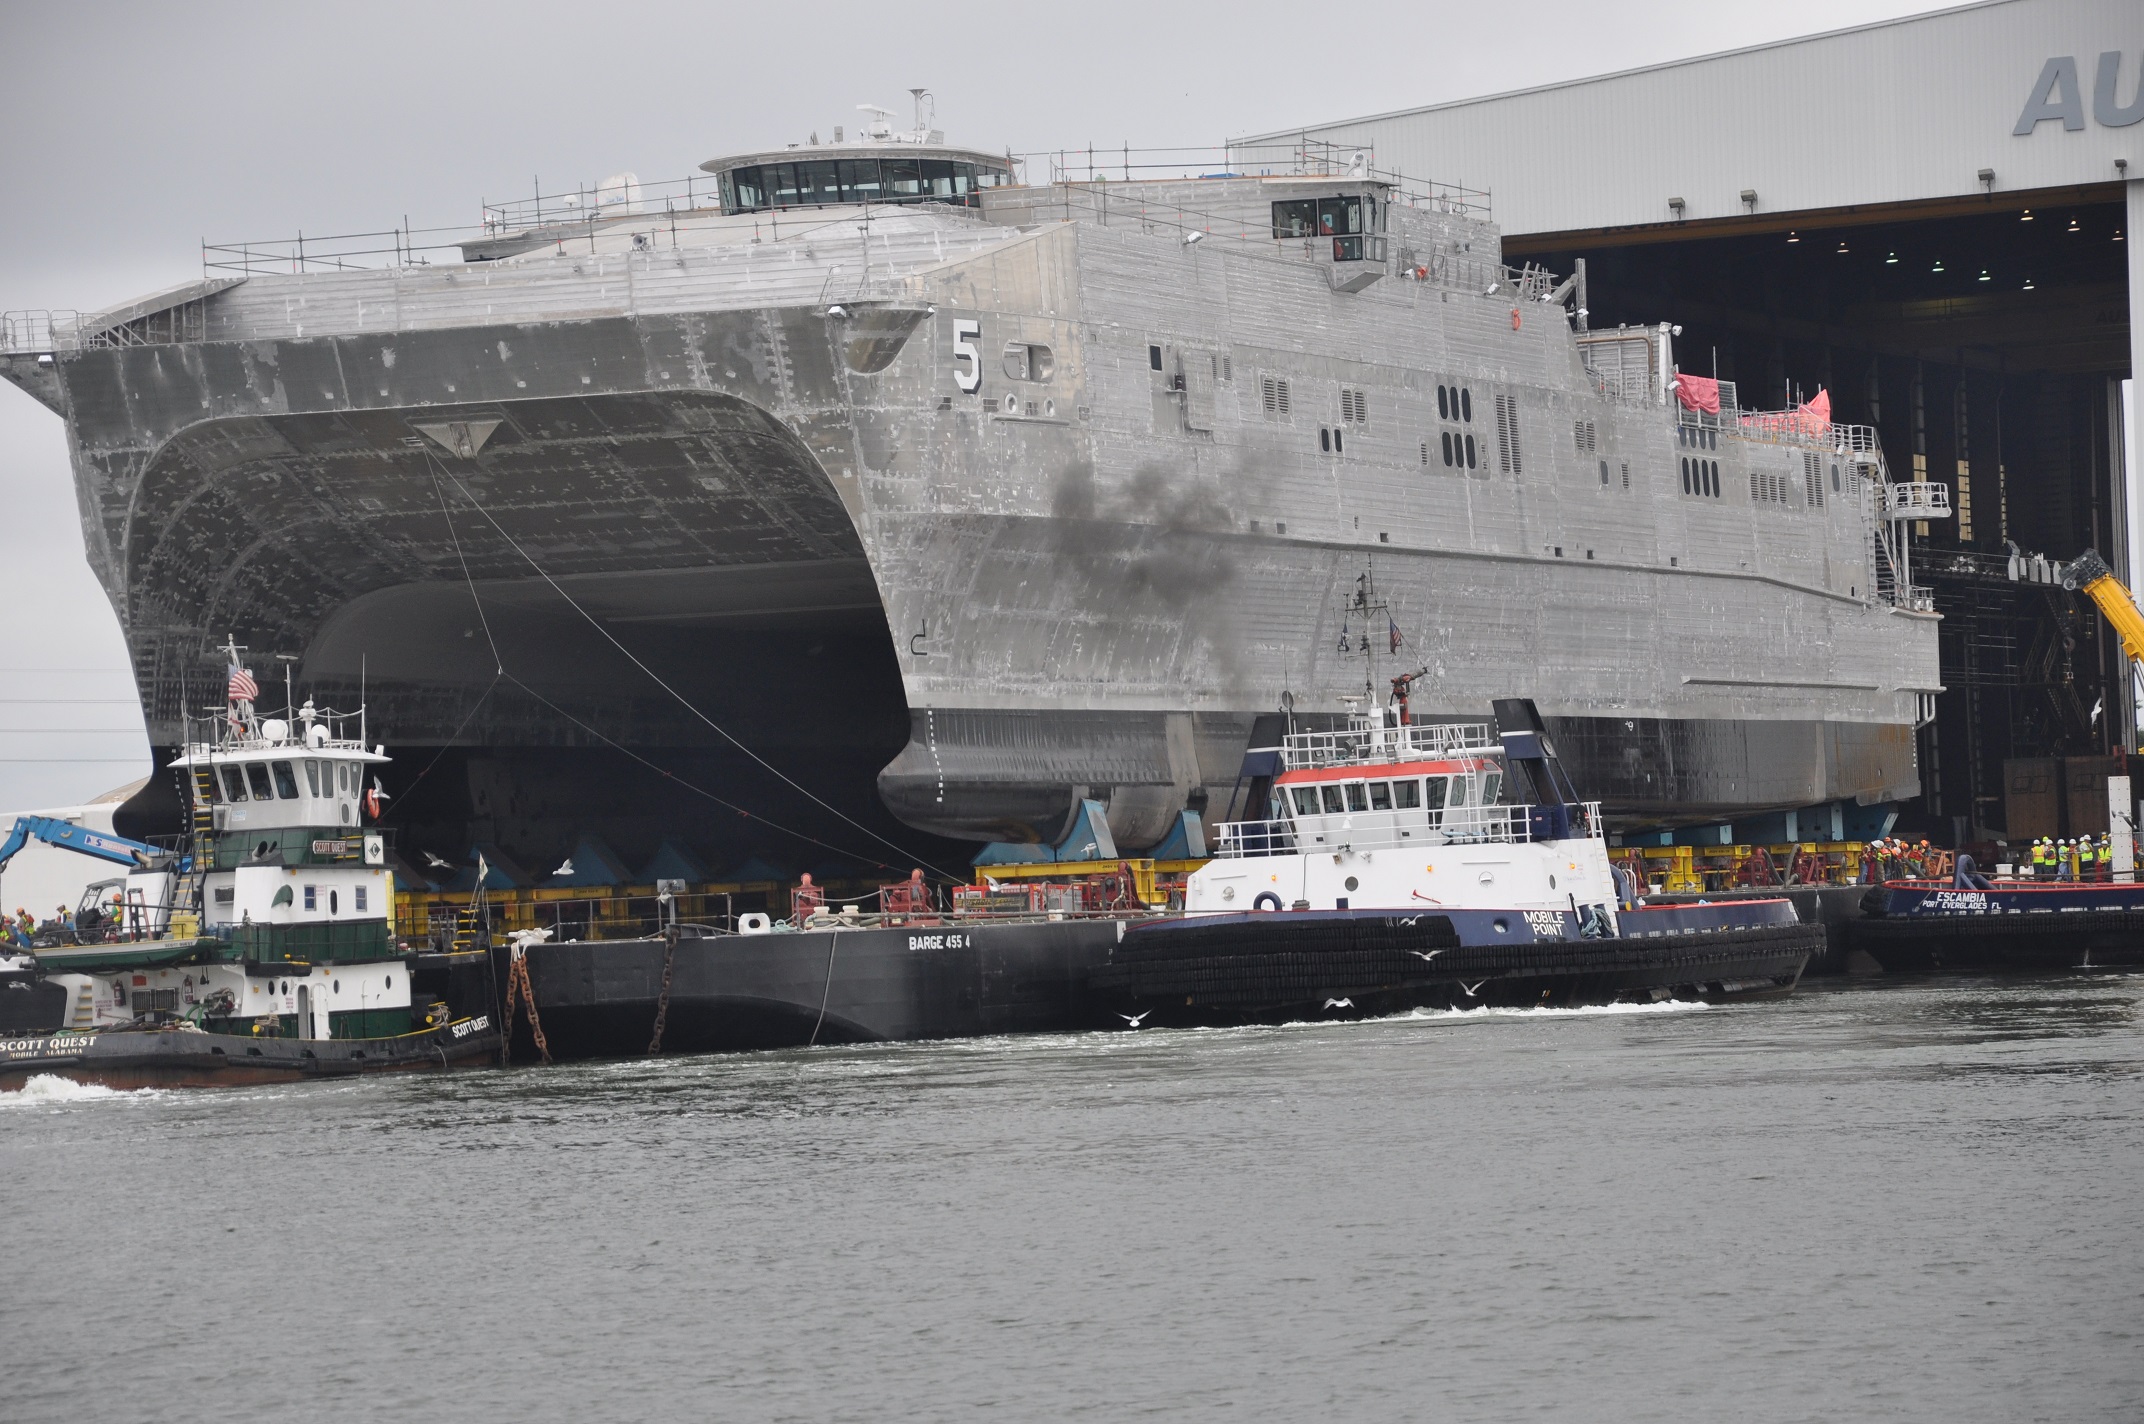 MOBILE, Ala. (Sept. 30, 2014) The future Military Sealift Command joint high-speed vessel USNS Trenton (JHSV 5) rolls out in preparation for launch at Austal USA shipyard. Photo courtesy of U.S. Navy.